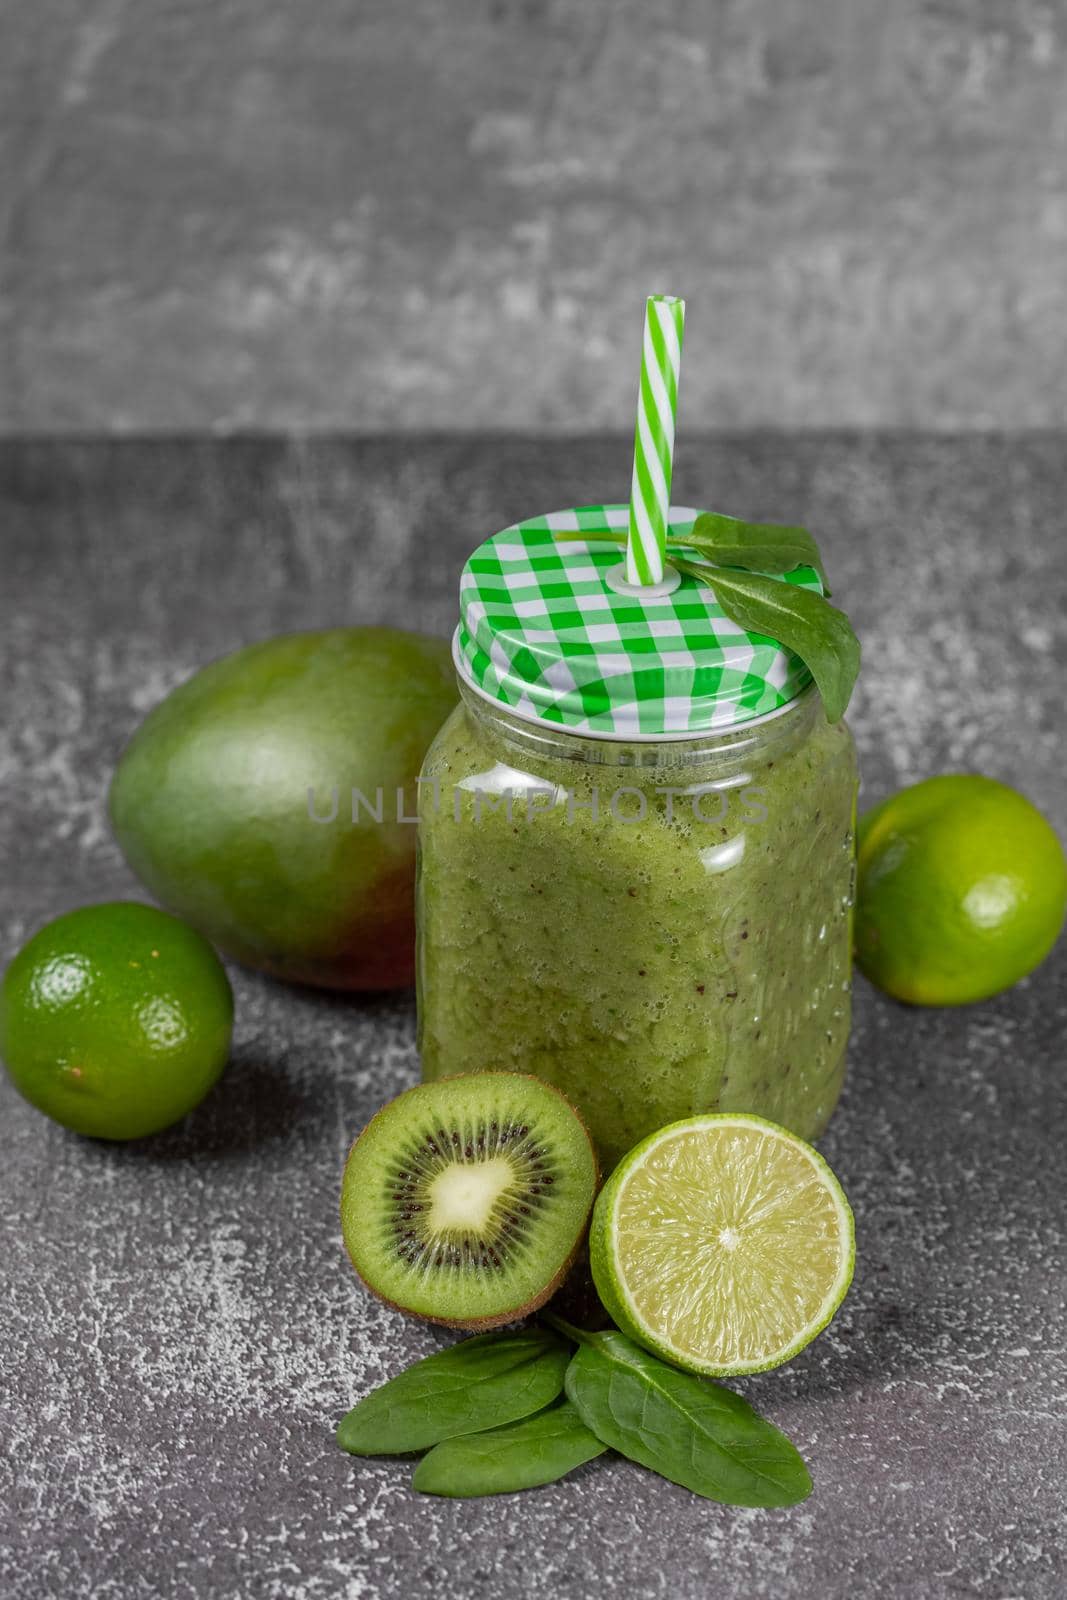 Diet and detox concept. Green smoothie with spinach, banana, kiwi and apple juice over dark background. Clean eating and healthy food.